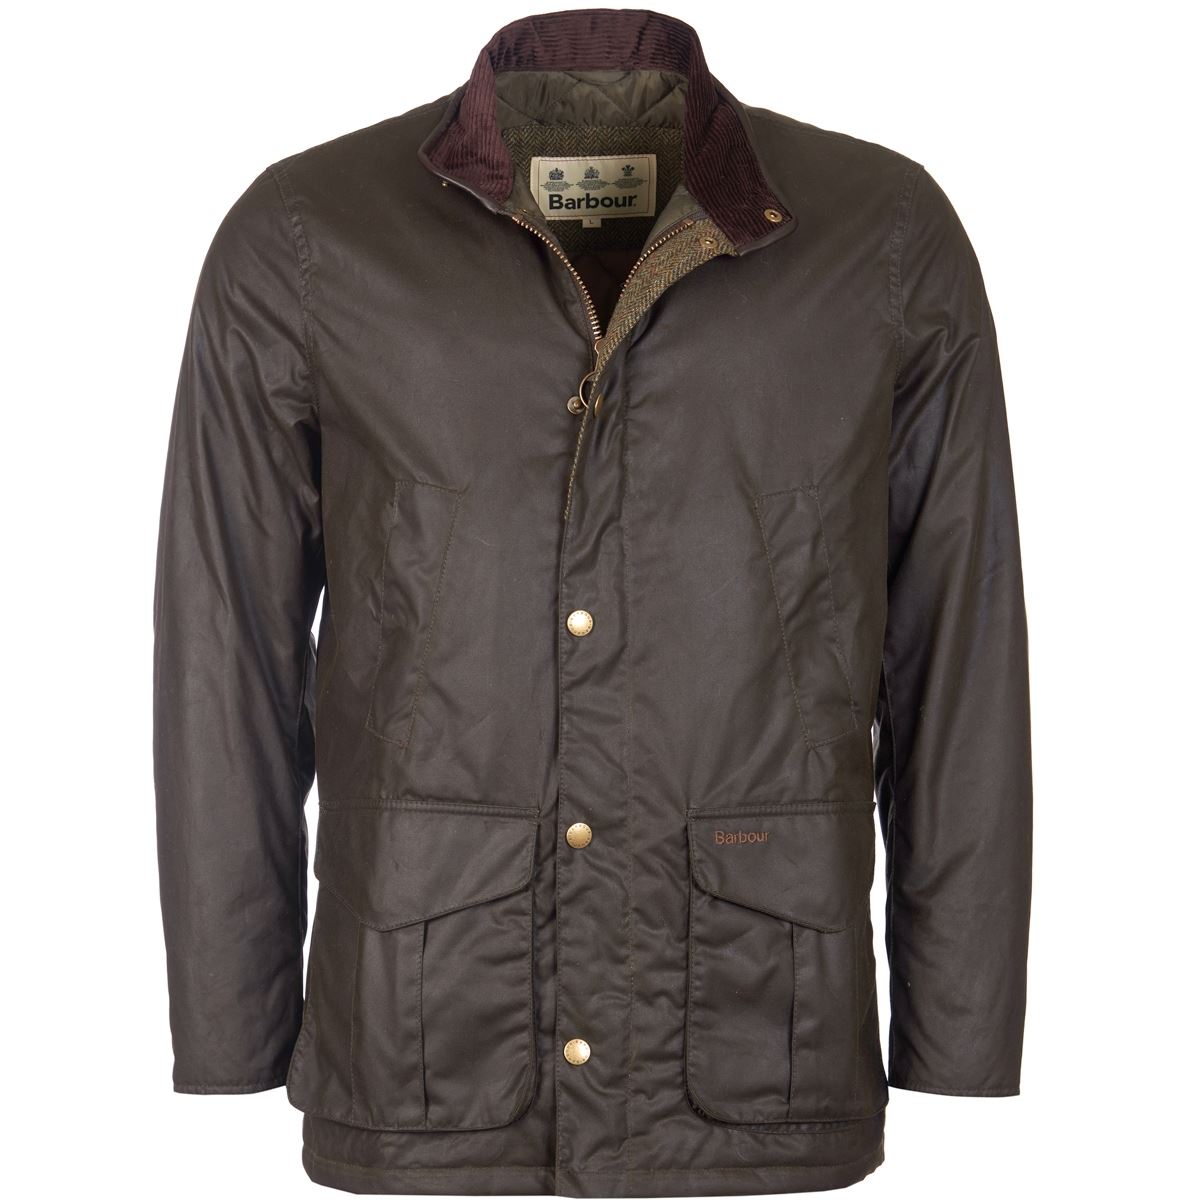 What is the lining material of the Barbour Hereford Jacket?